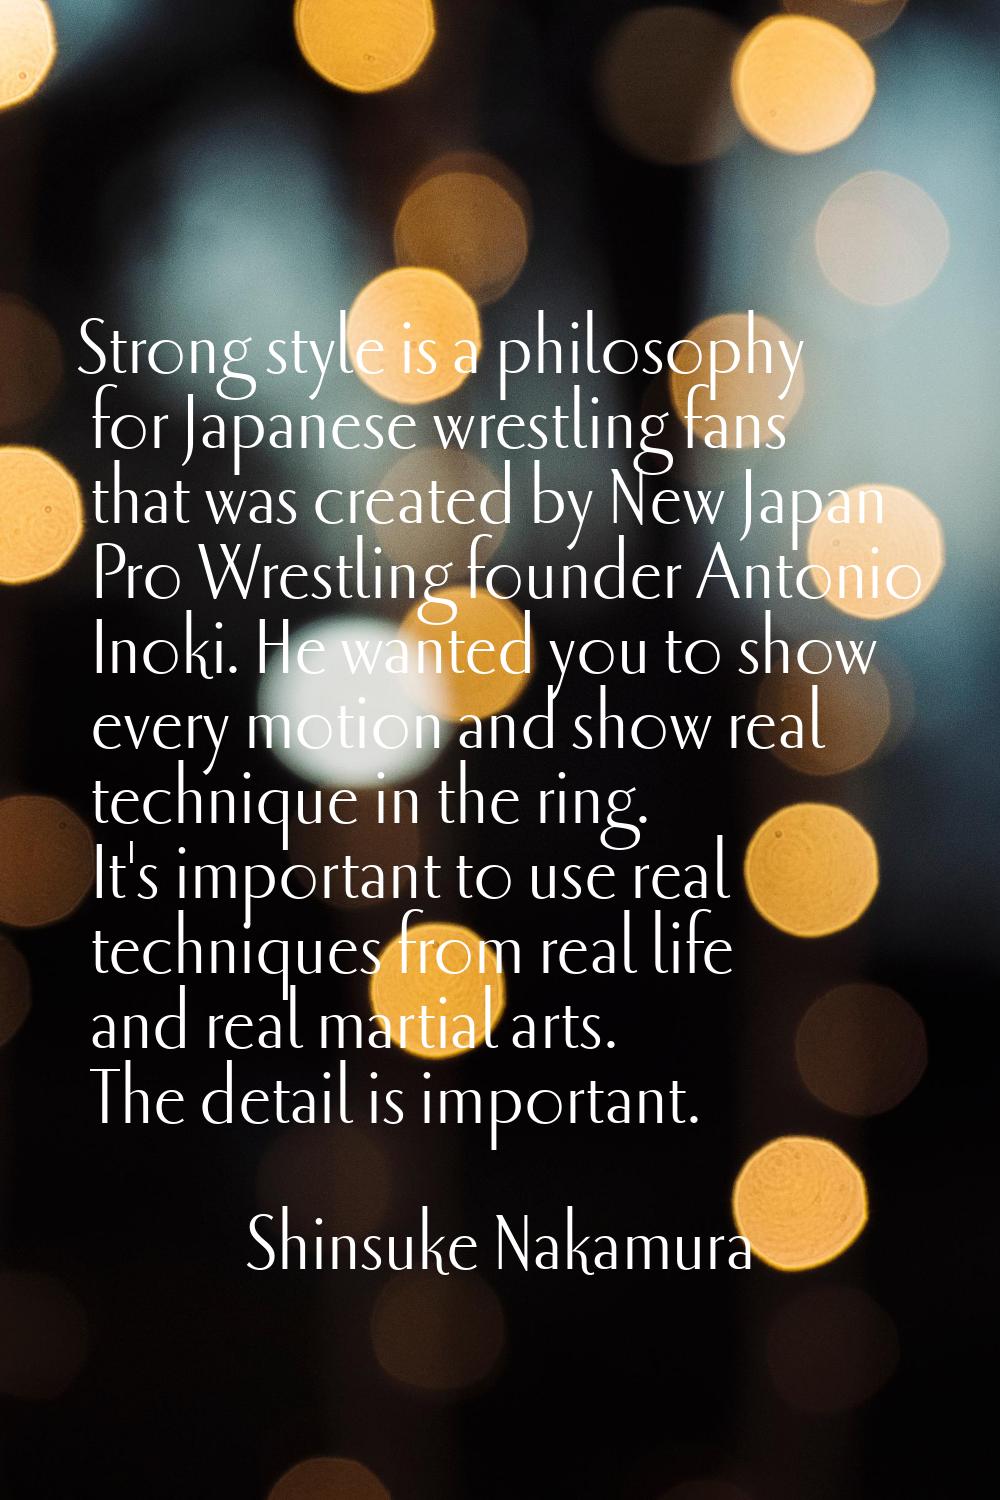 Strong style is a philosophy for Japanese wrestling fans that was created by New Japan Pro Wrestlin